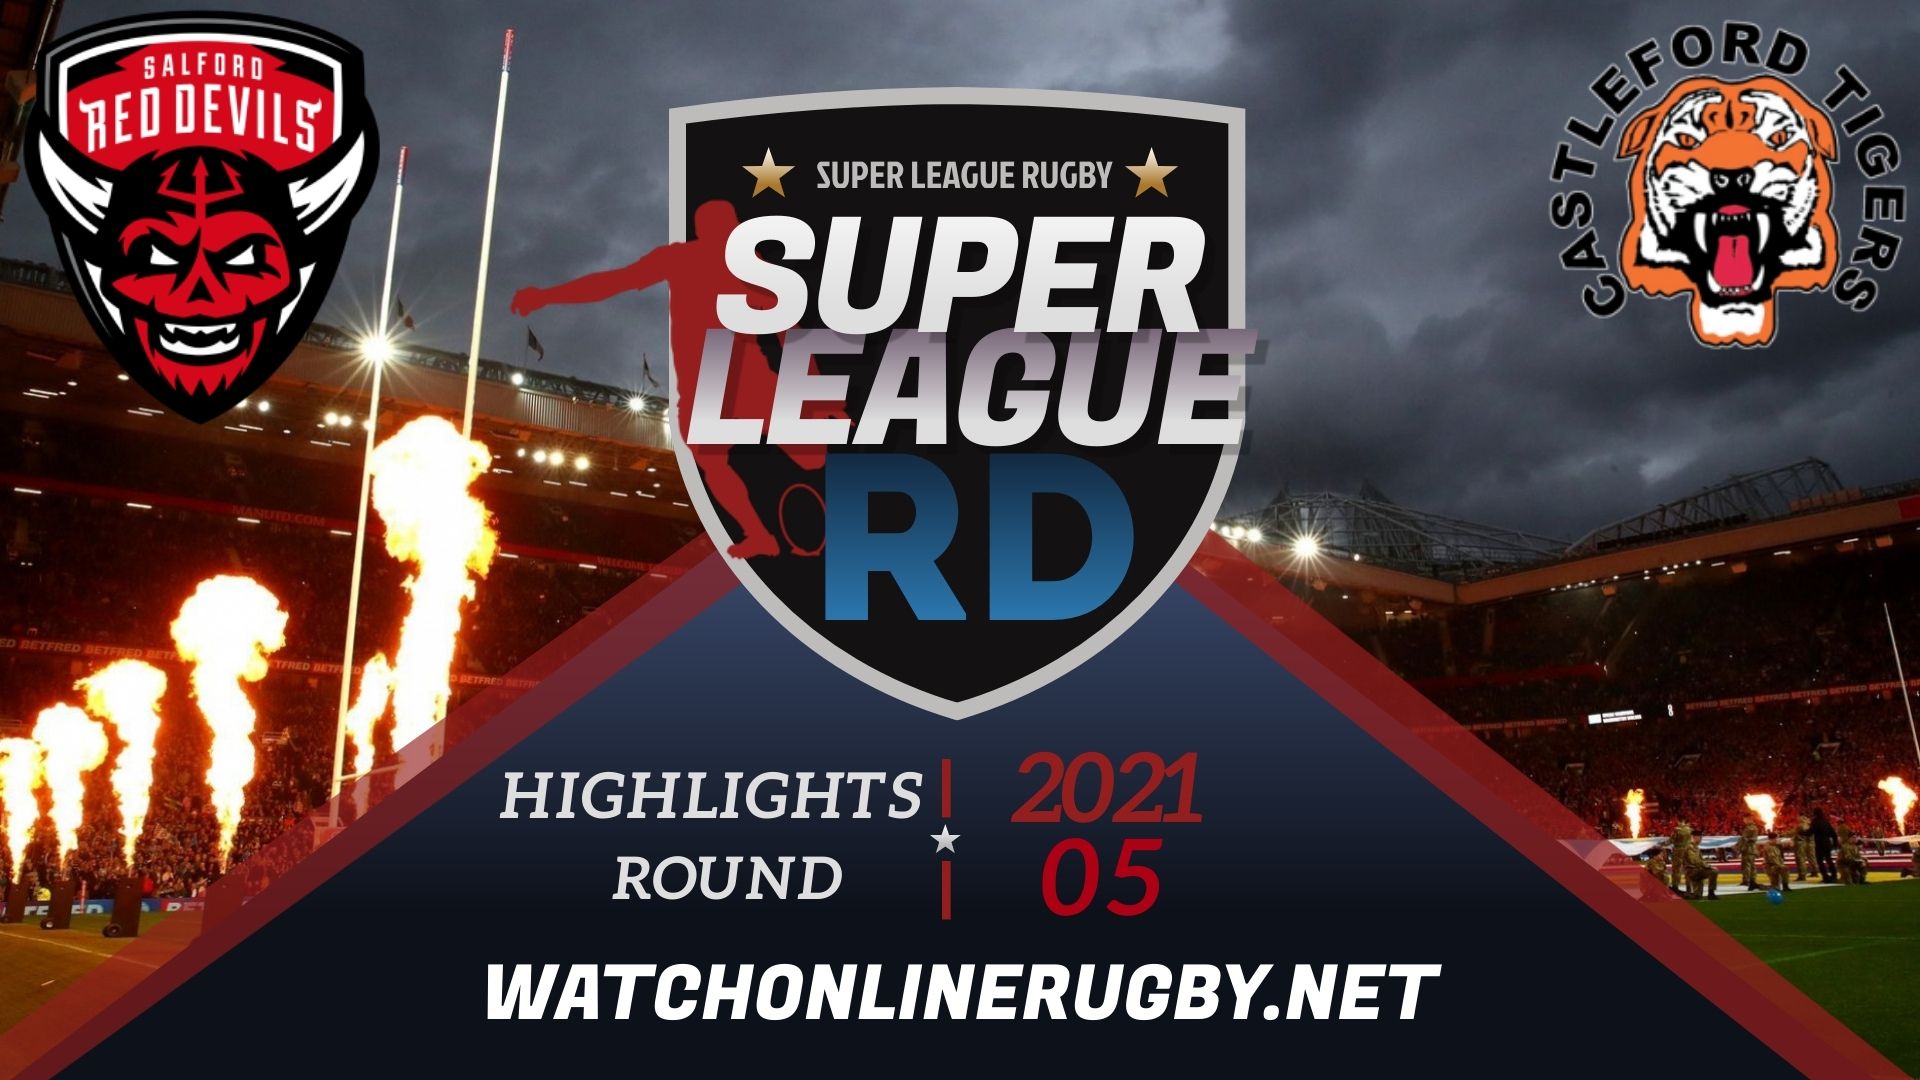 Salford Red Devils Vs Castleford Tigers Super League Rugby 2021 RD 5